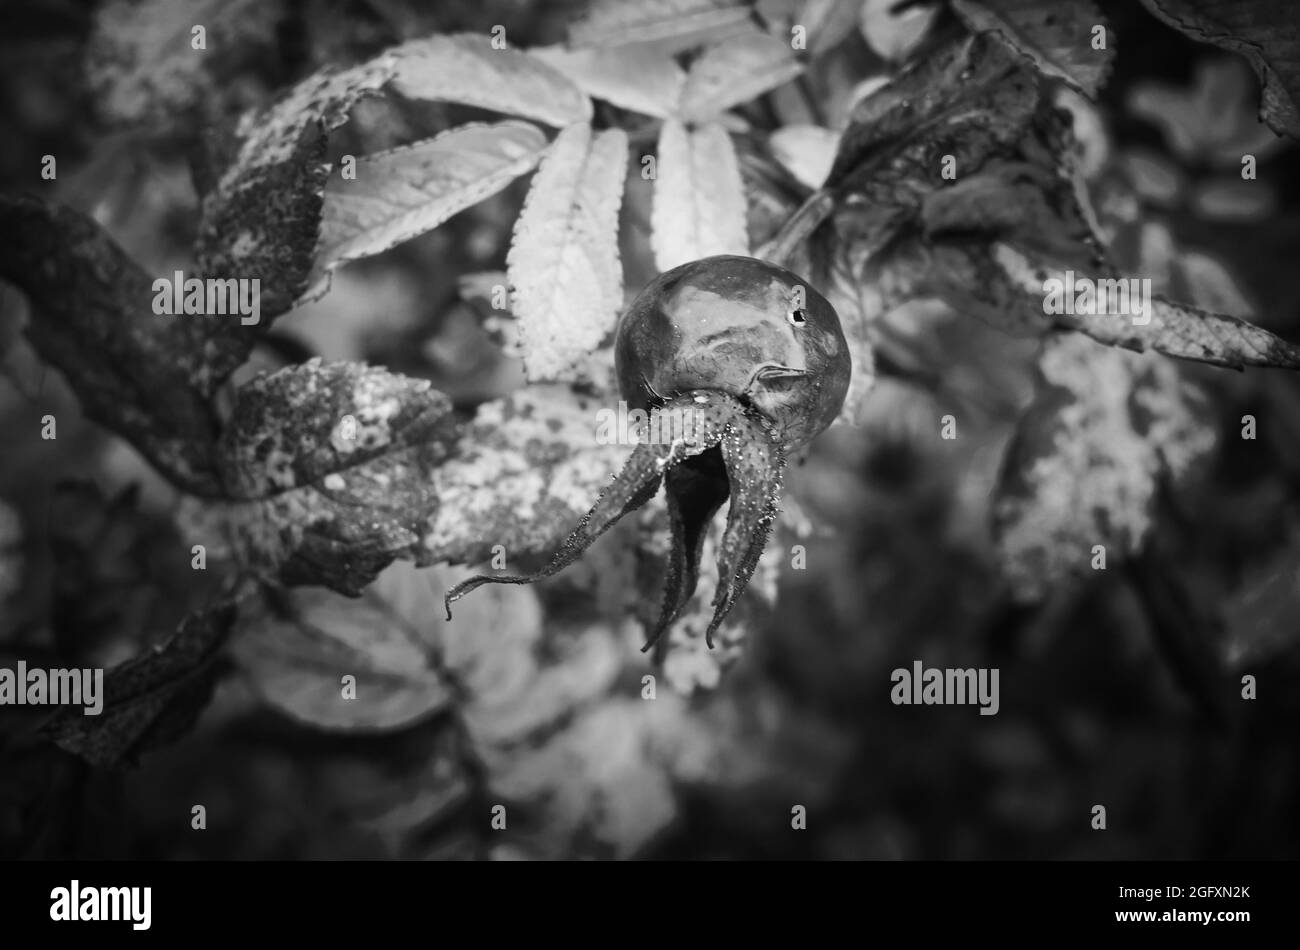 Fruit and dry leaves of a wild rose in autumn season, close up  black and white photo with selective focus Stock Photo